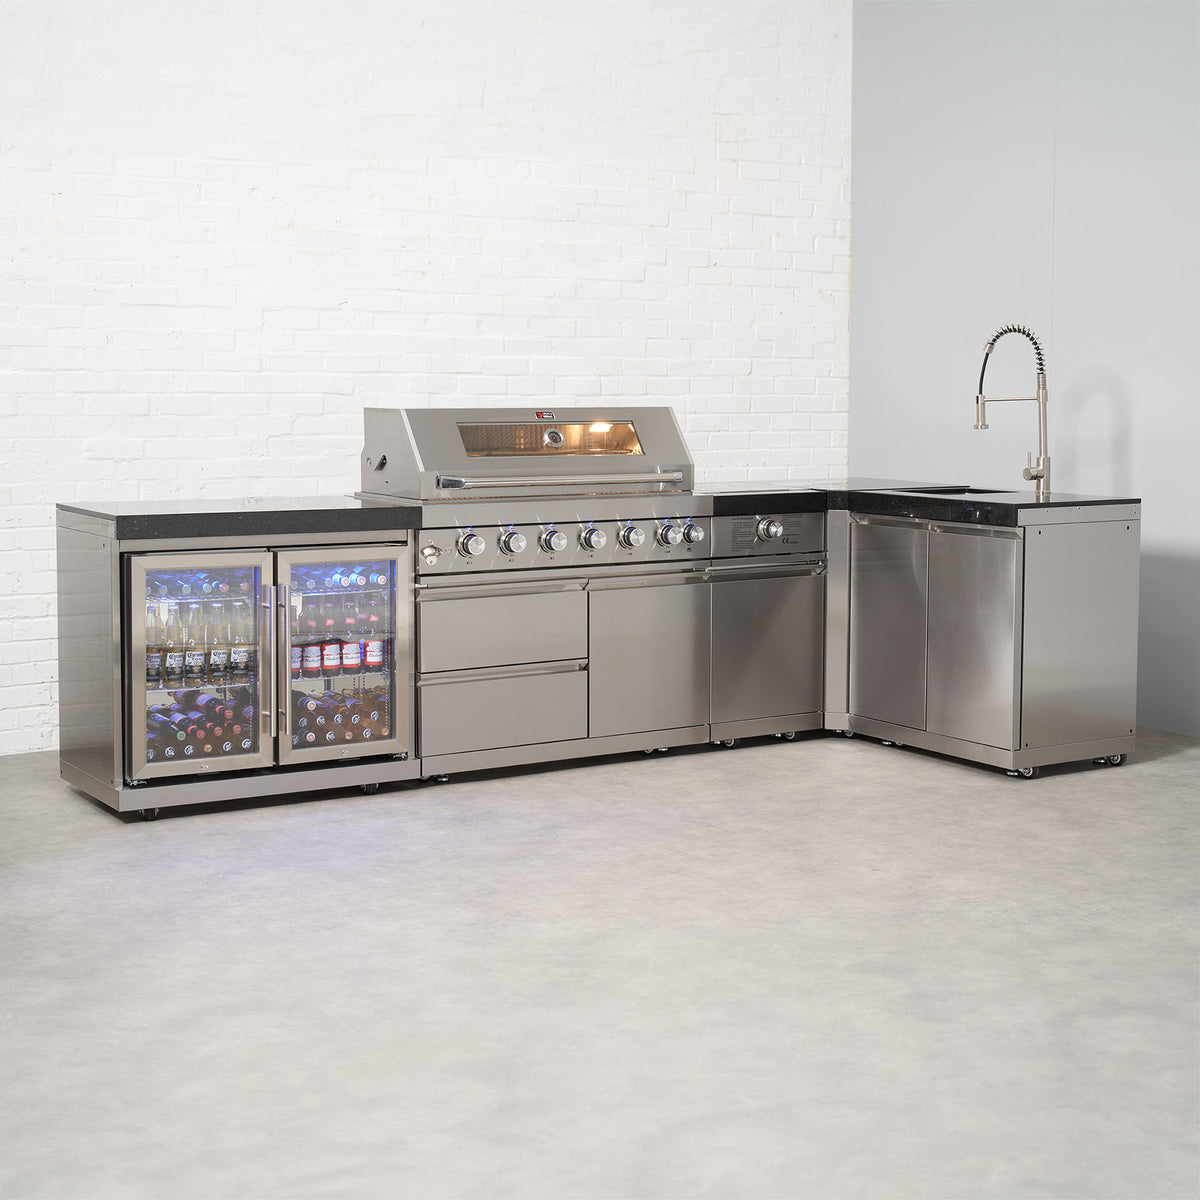 Draco Grills 6 Burner BBQ Modular Outdoor Kitchen with Sear Station, Double Fridge and Sink